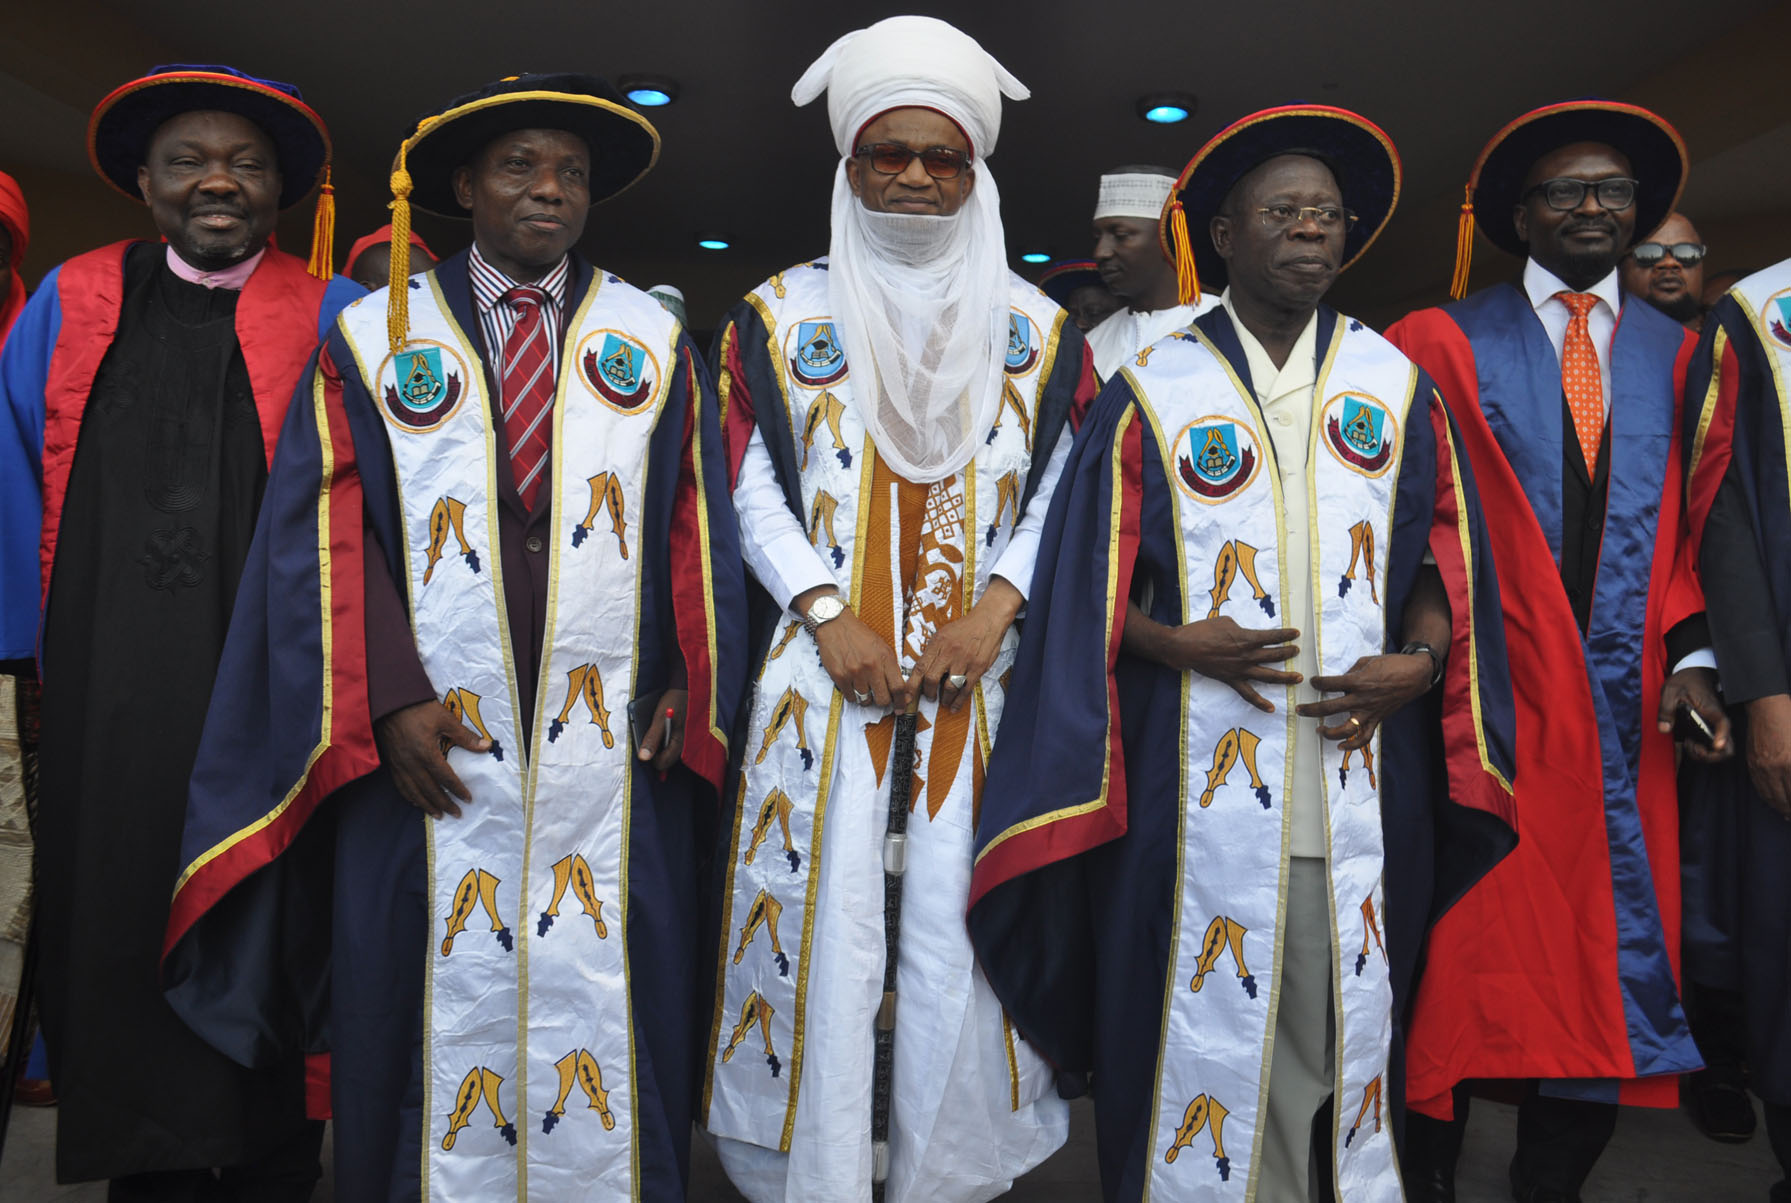 From left: Rt Hon Dr Justin Okonoboh, Speaker, Edo State House of Assembly, Prof Ignatius Onimawo, Vice-Chancellor Ambrose Alli University; HRH Alhaji Yahaya Abubakar, Etsu Nupe and Chancellor; Governor Adams Oshiomhole, Visitor to the Univeristy and Mr Gideon Obhakhan, Commissioner for Education at the 20th Convocation of the University, yesterday.